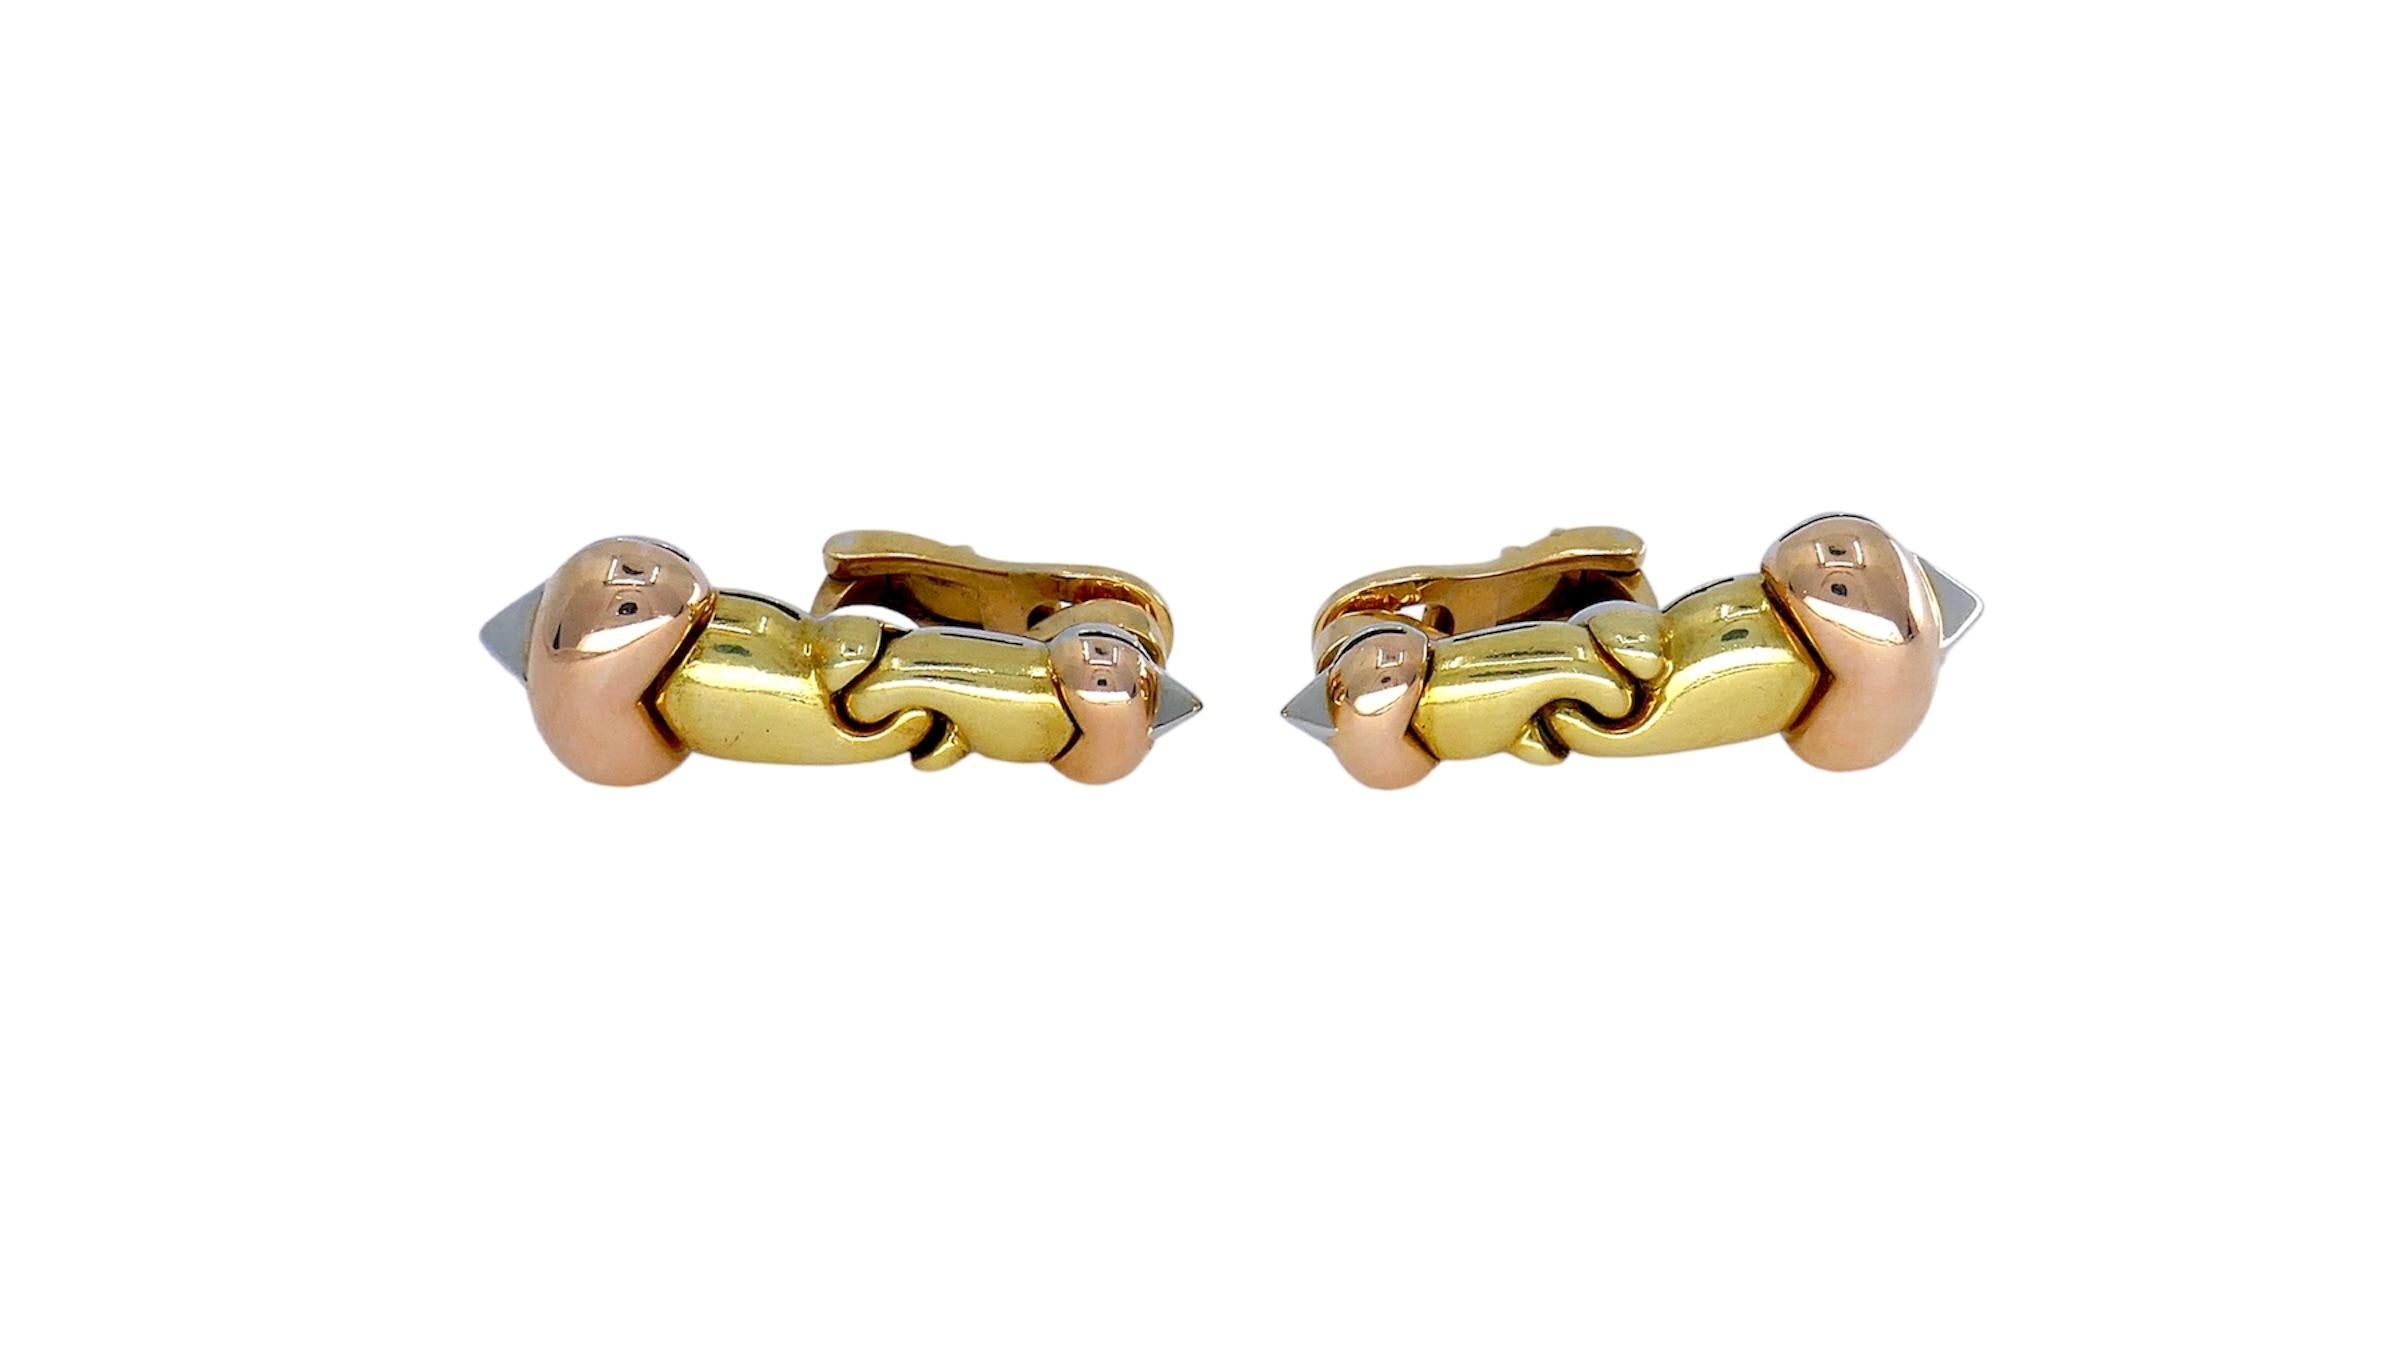 Crafted with finesse and sophistication, the Bvlgari Passo Doppio Tri-tone 18k Gold Earrings are a testament to timeless elegance. Designed as clip-on earrings, they offer both comfort and style, weighing a substantial 21.0 grams. The tricolor